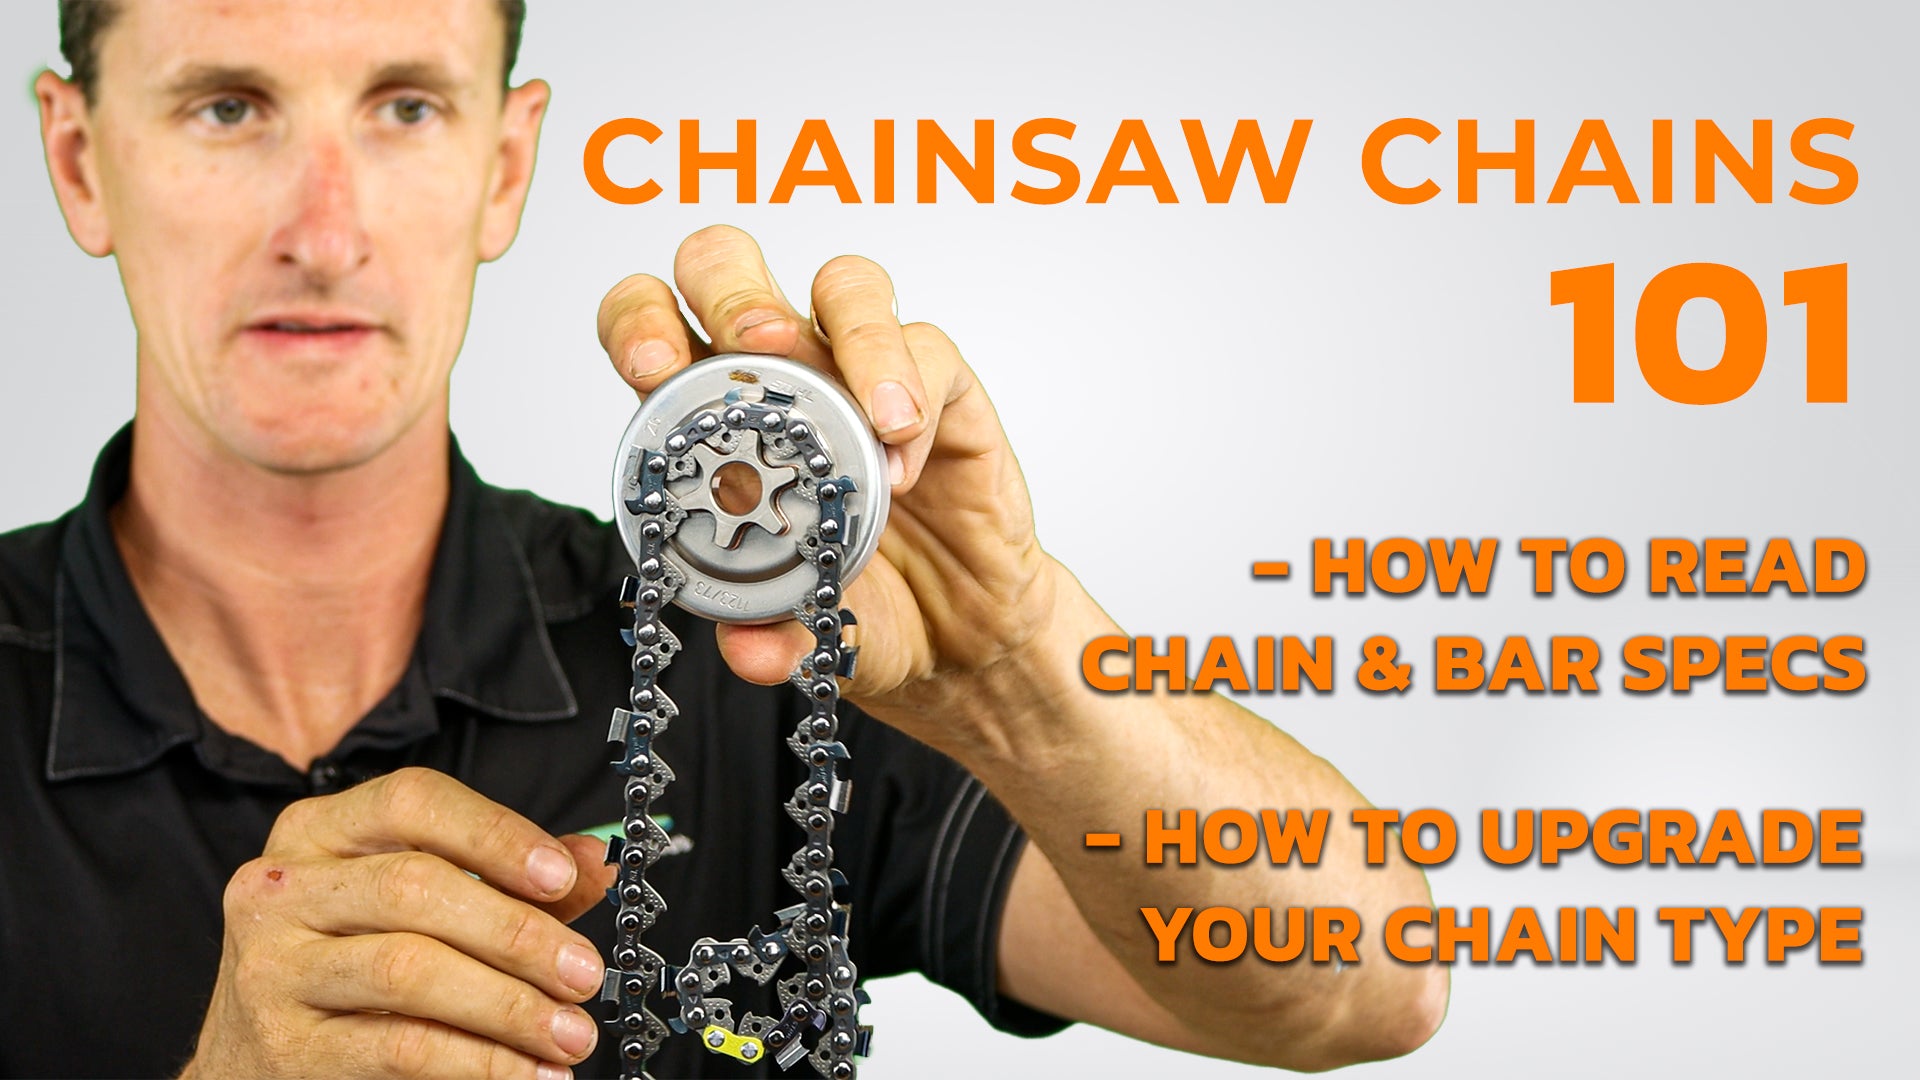 A Comprehensive Guide to Chainsaw Chains, Bars, & Sprocket. 101.